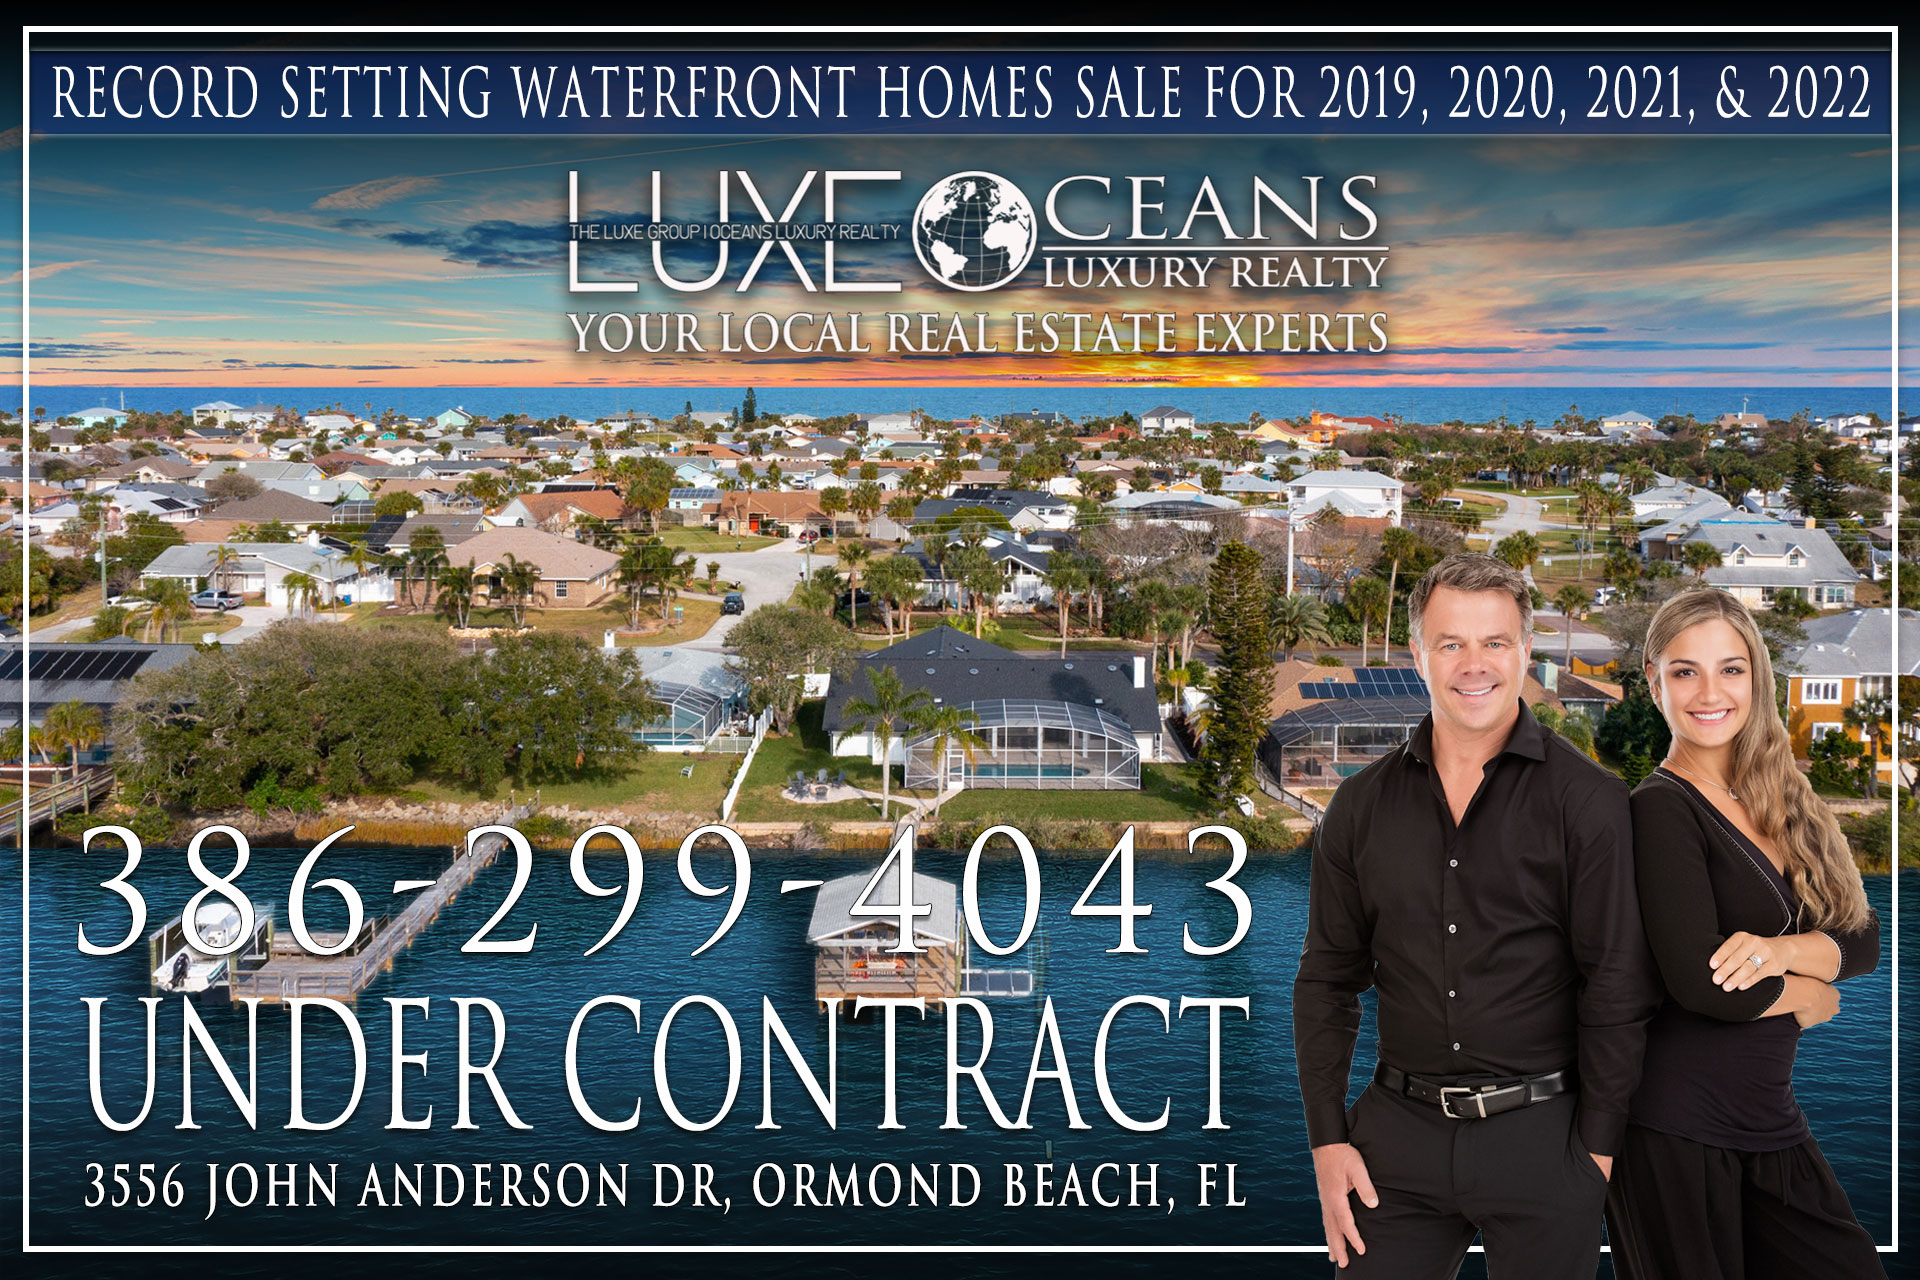 Ormond Beach Riverfront Homes For Sale. John Anderson Drive Homes For Sale. Luxury waterfront estates in Florida. The LUXE Group at Oceans Luxury Realty